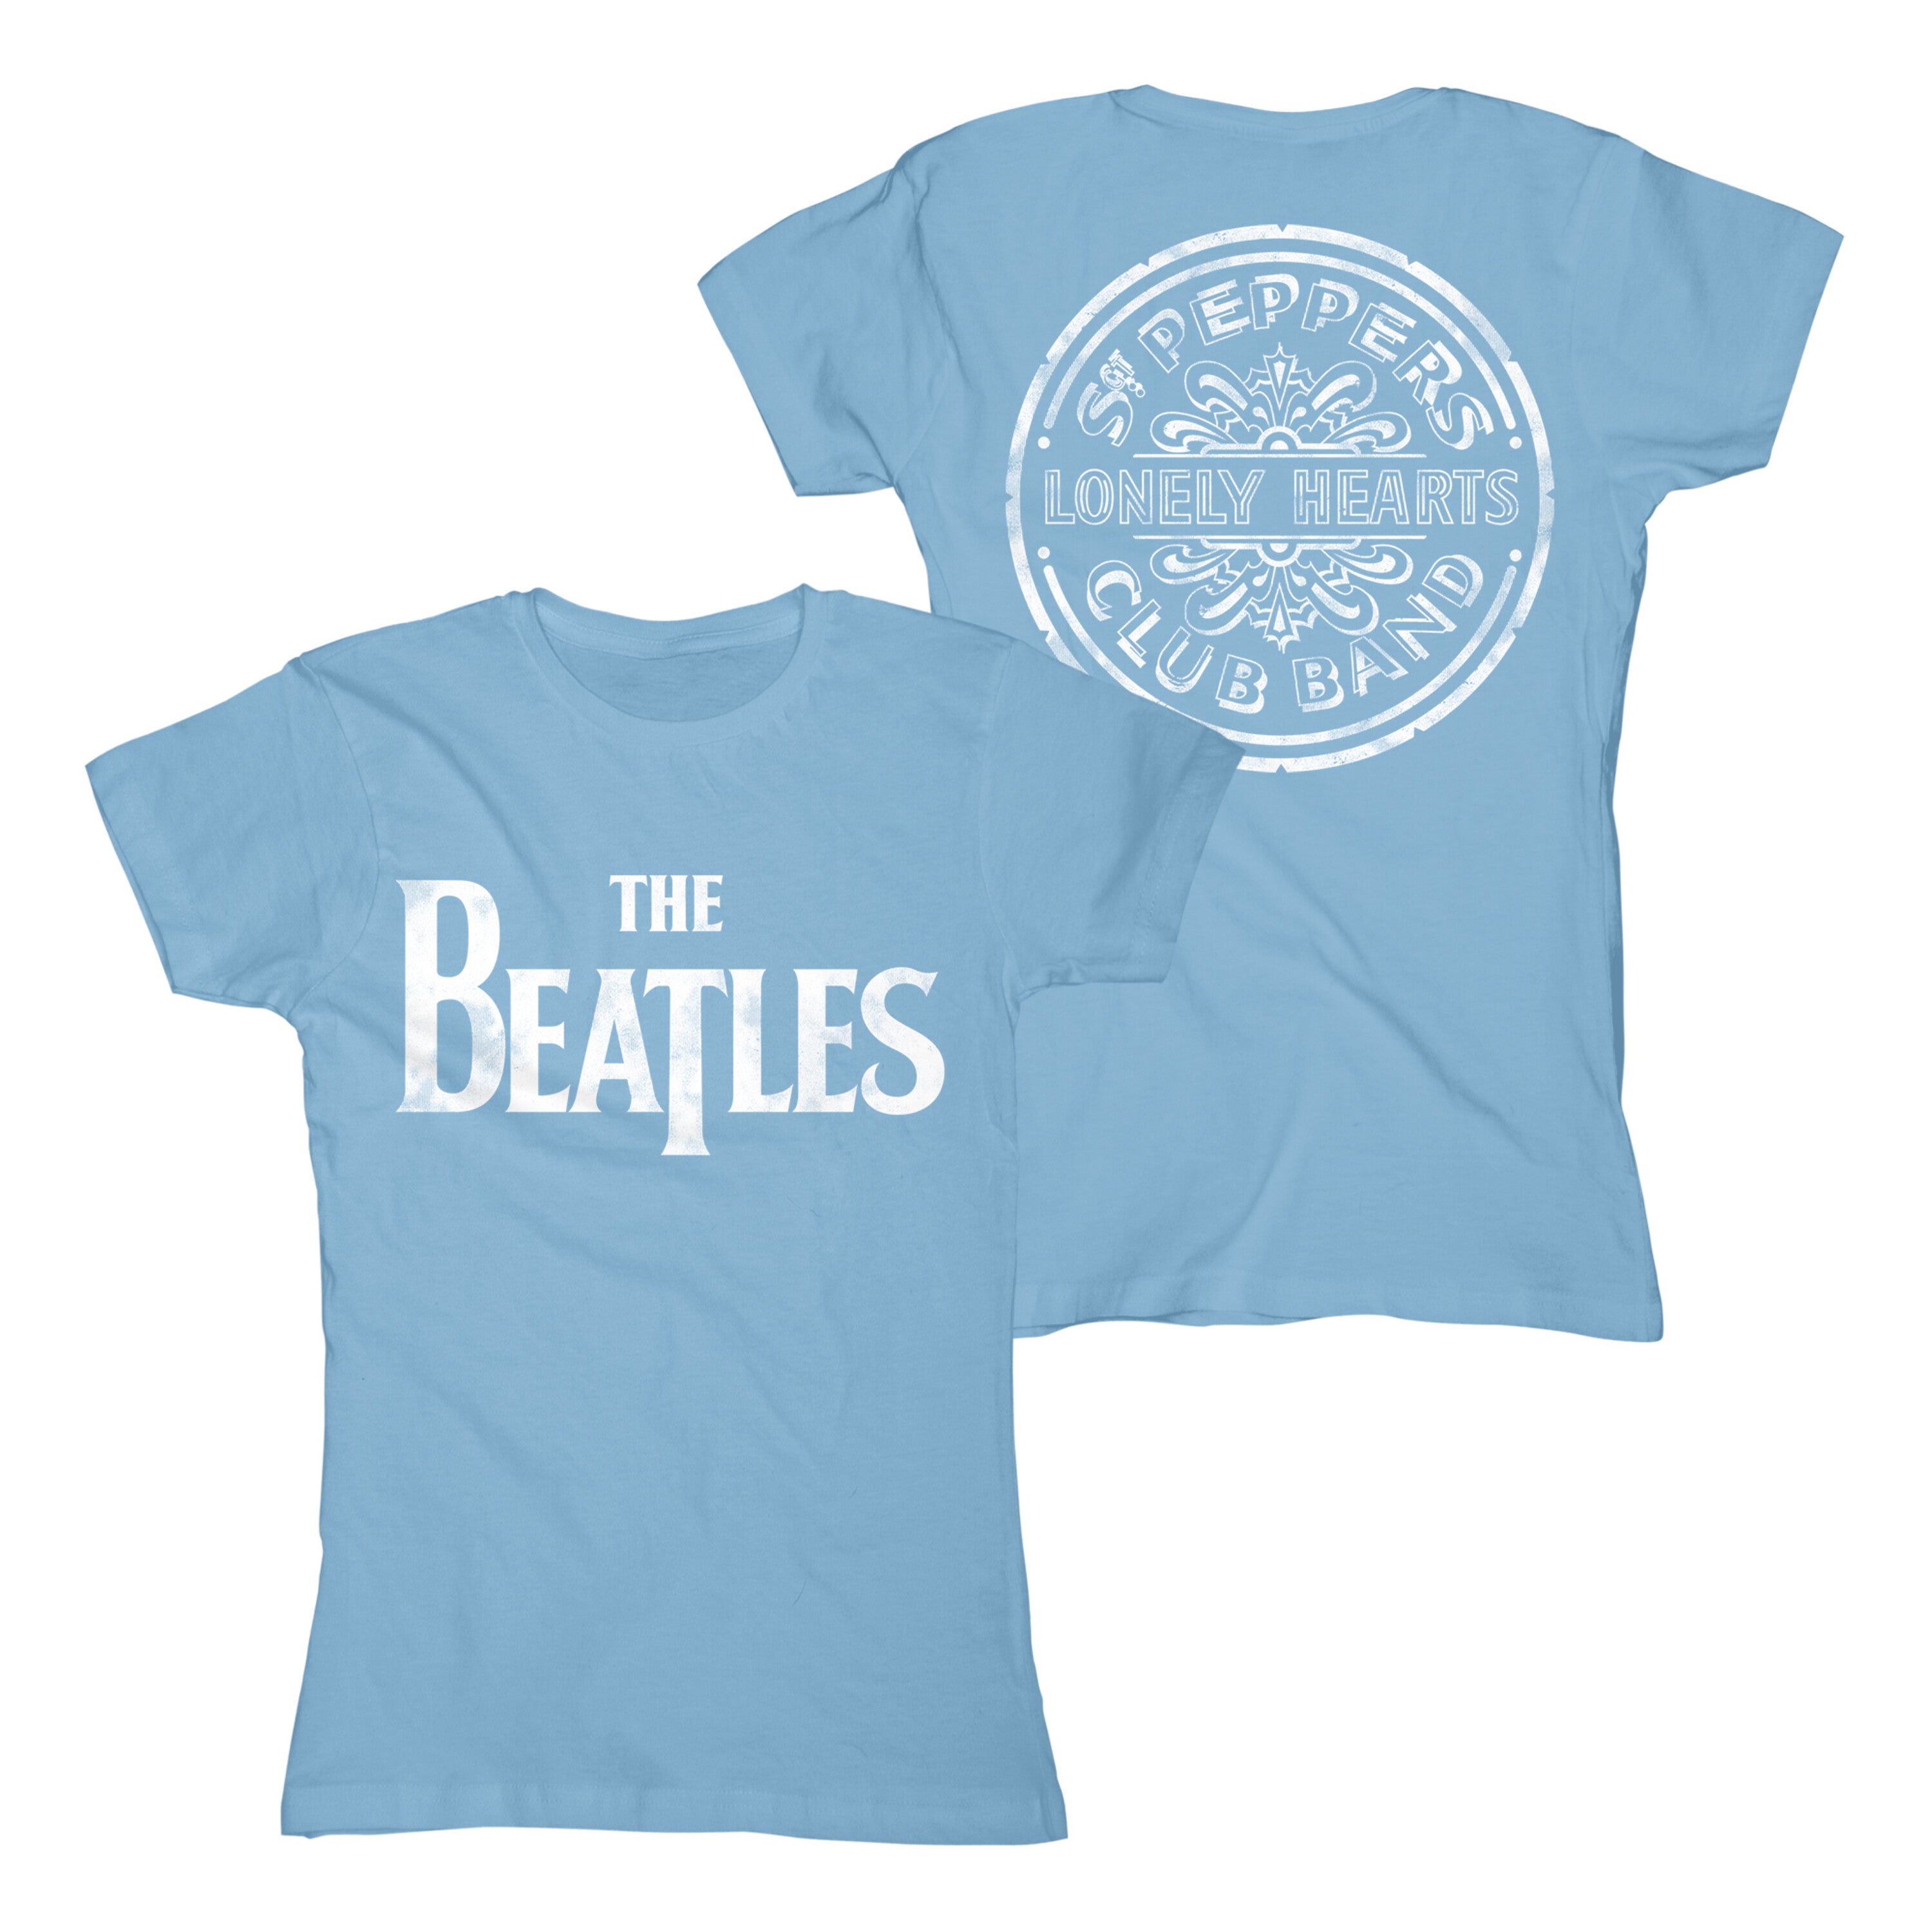 https://images.bravado.de/prod/product-assets/product-asset-data/beatles-the/the-beatles-domestic/products/135388/web/247282/image-thumb__247282__3000x3000_original/The-Beatles-Sgt-Peppers-Distressed-Girlie-Shirt-blau-135388-247282.jpg